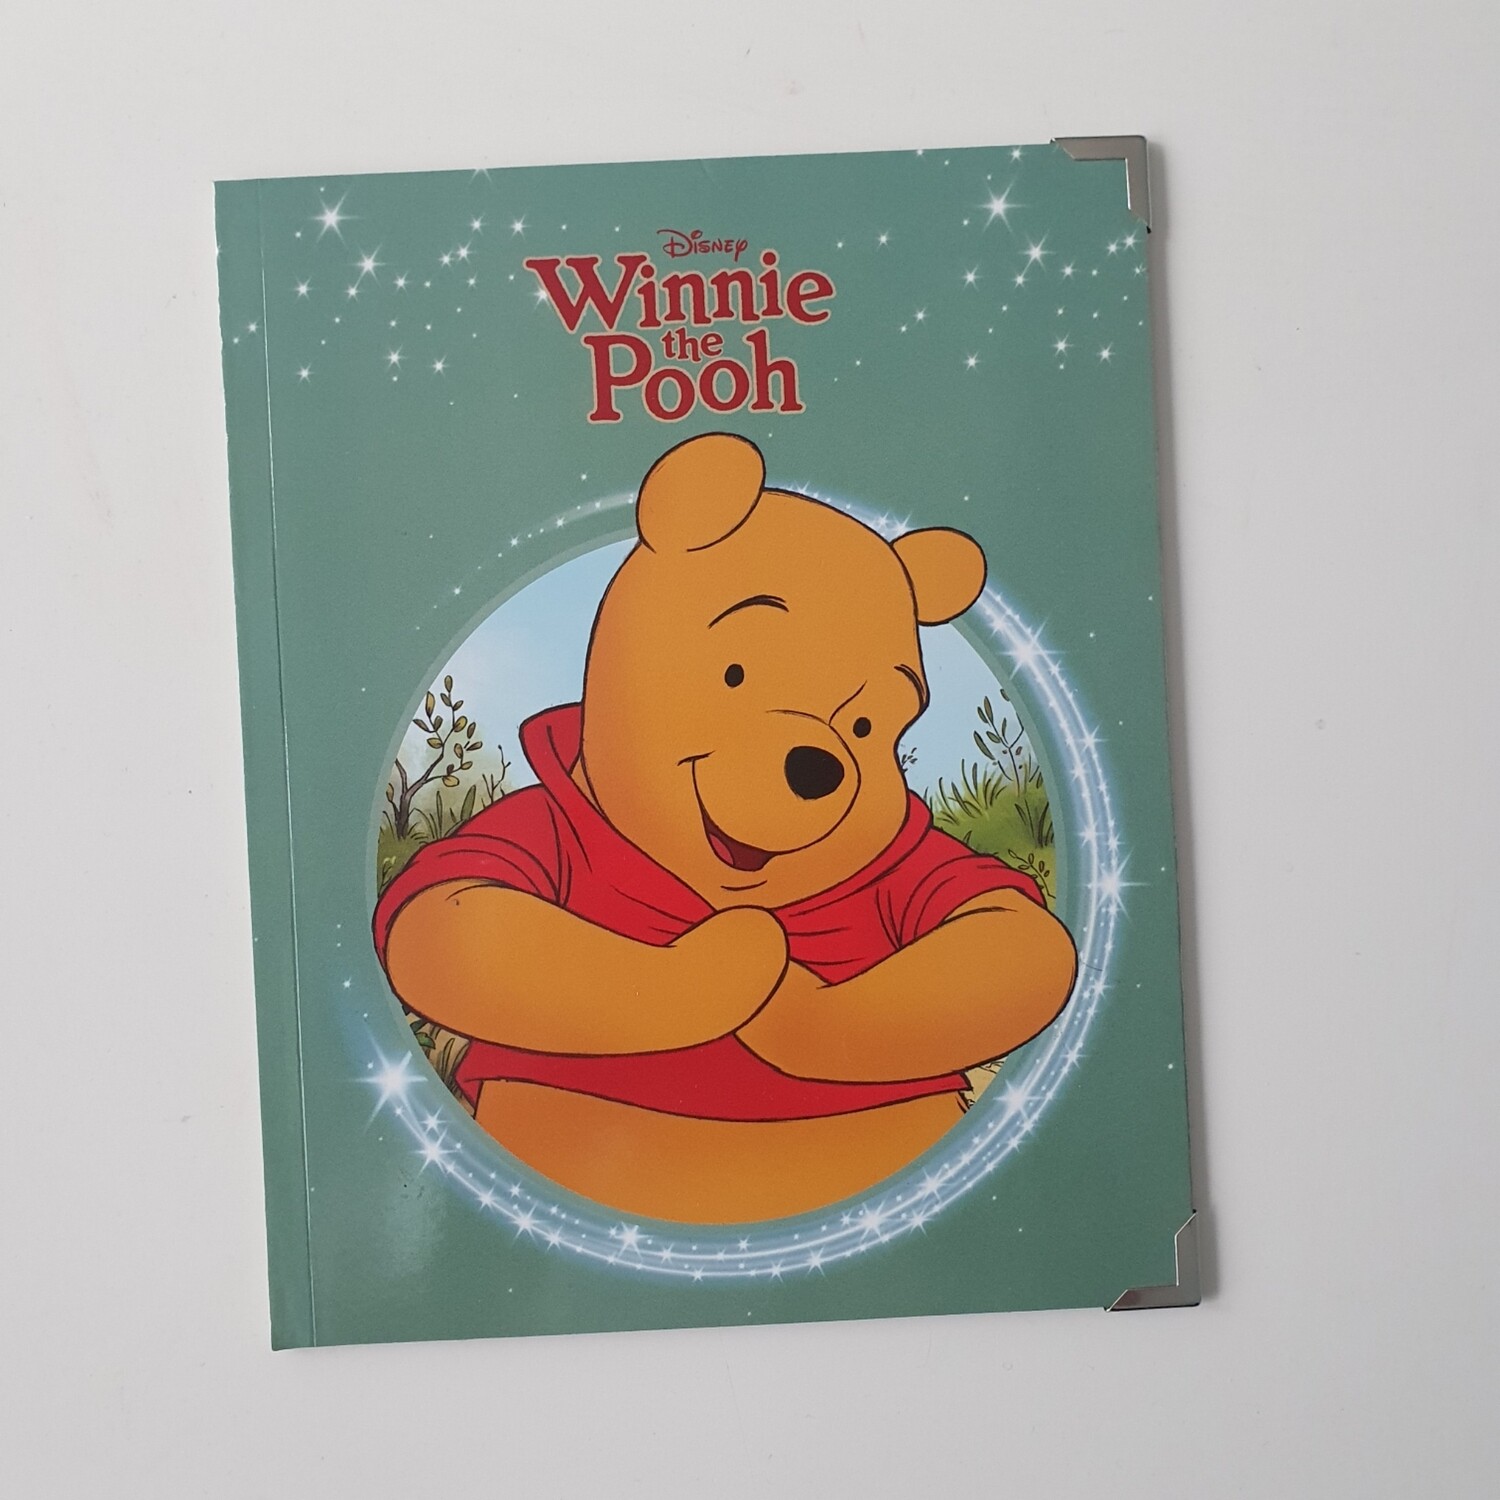 Winnie the Pooh Notebook - board book will come with metal book corners included